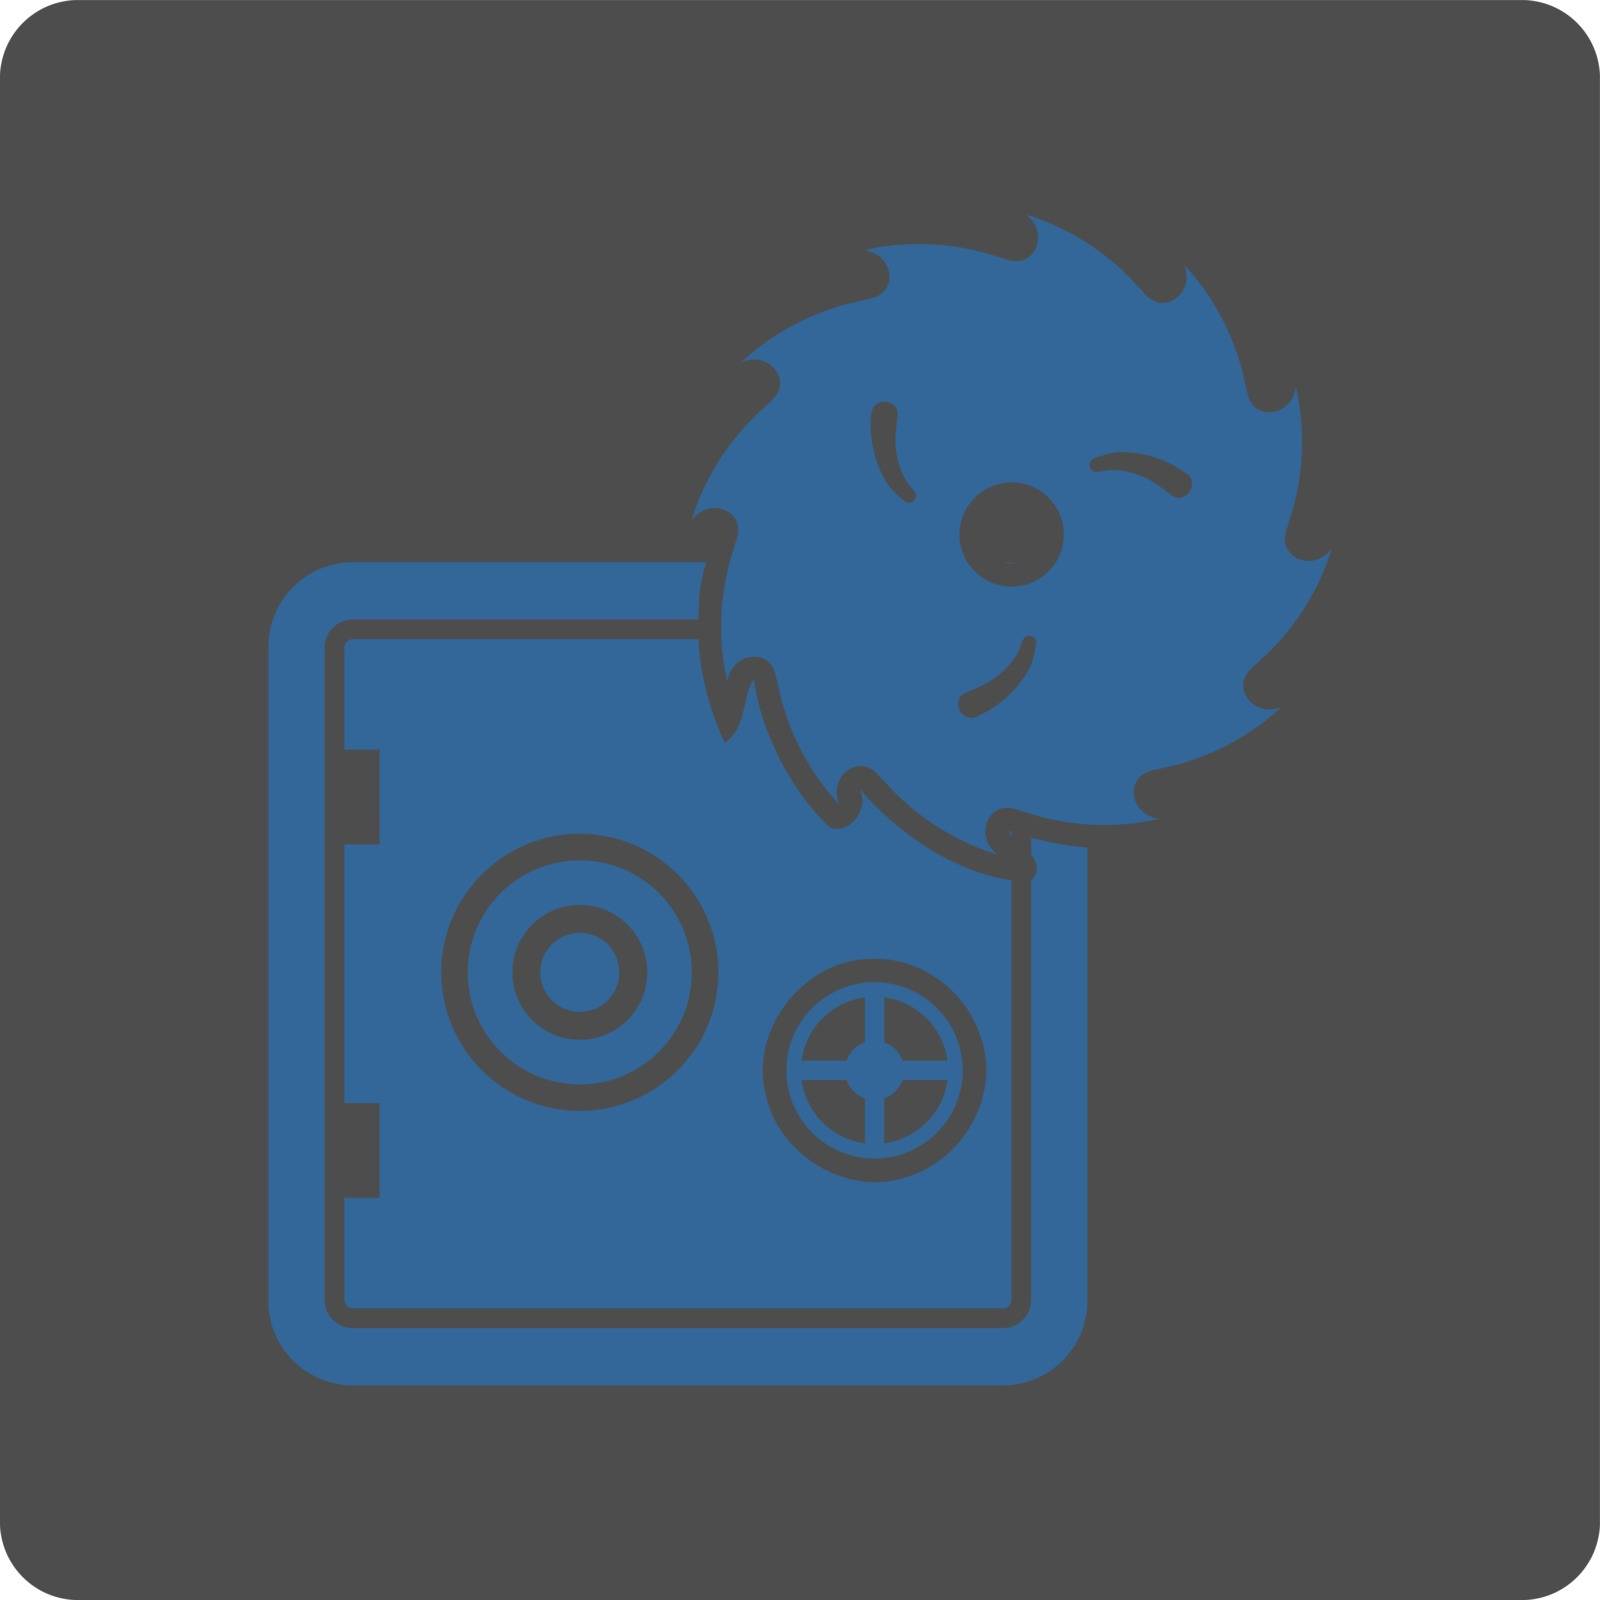 Hacking theft icon by ahasoft